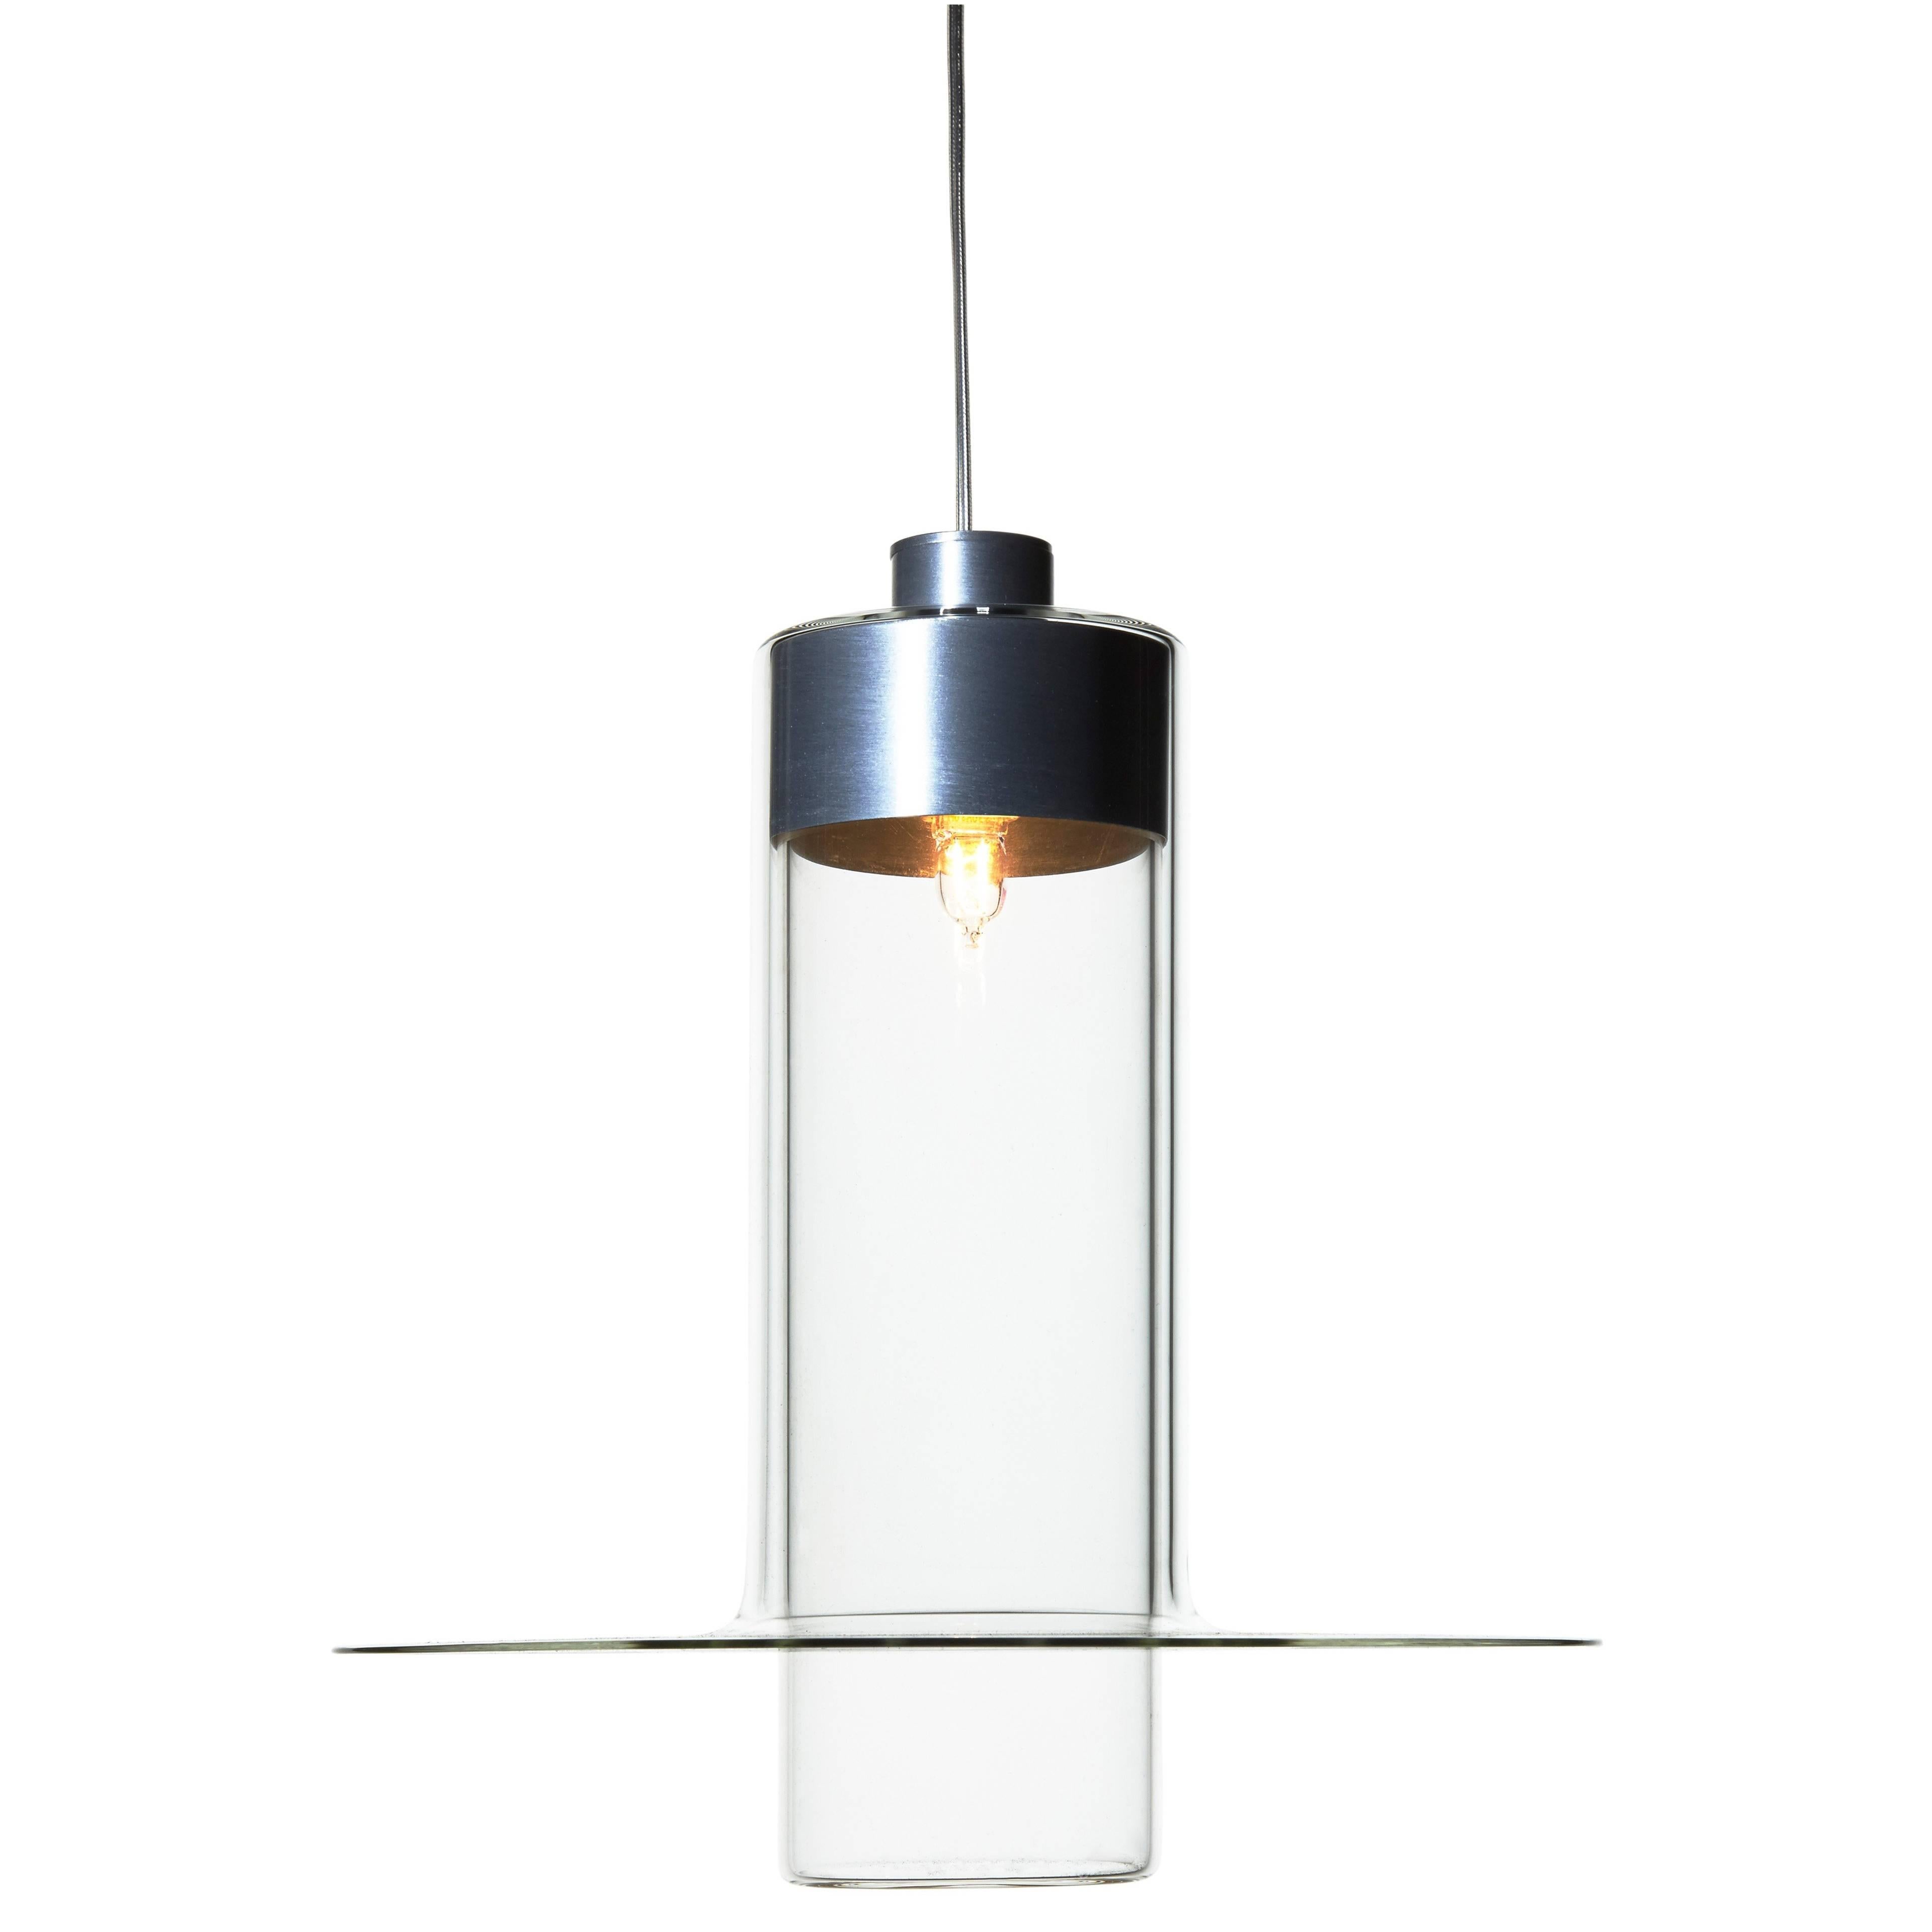 Sleeve Large by John Pawson – Handmade Blown Glass Lamp For Sale at 1stDibs